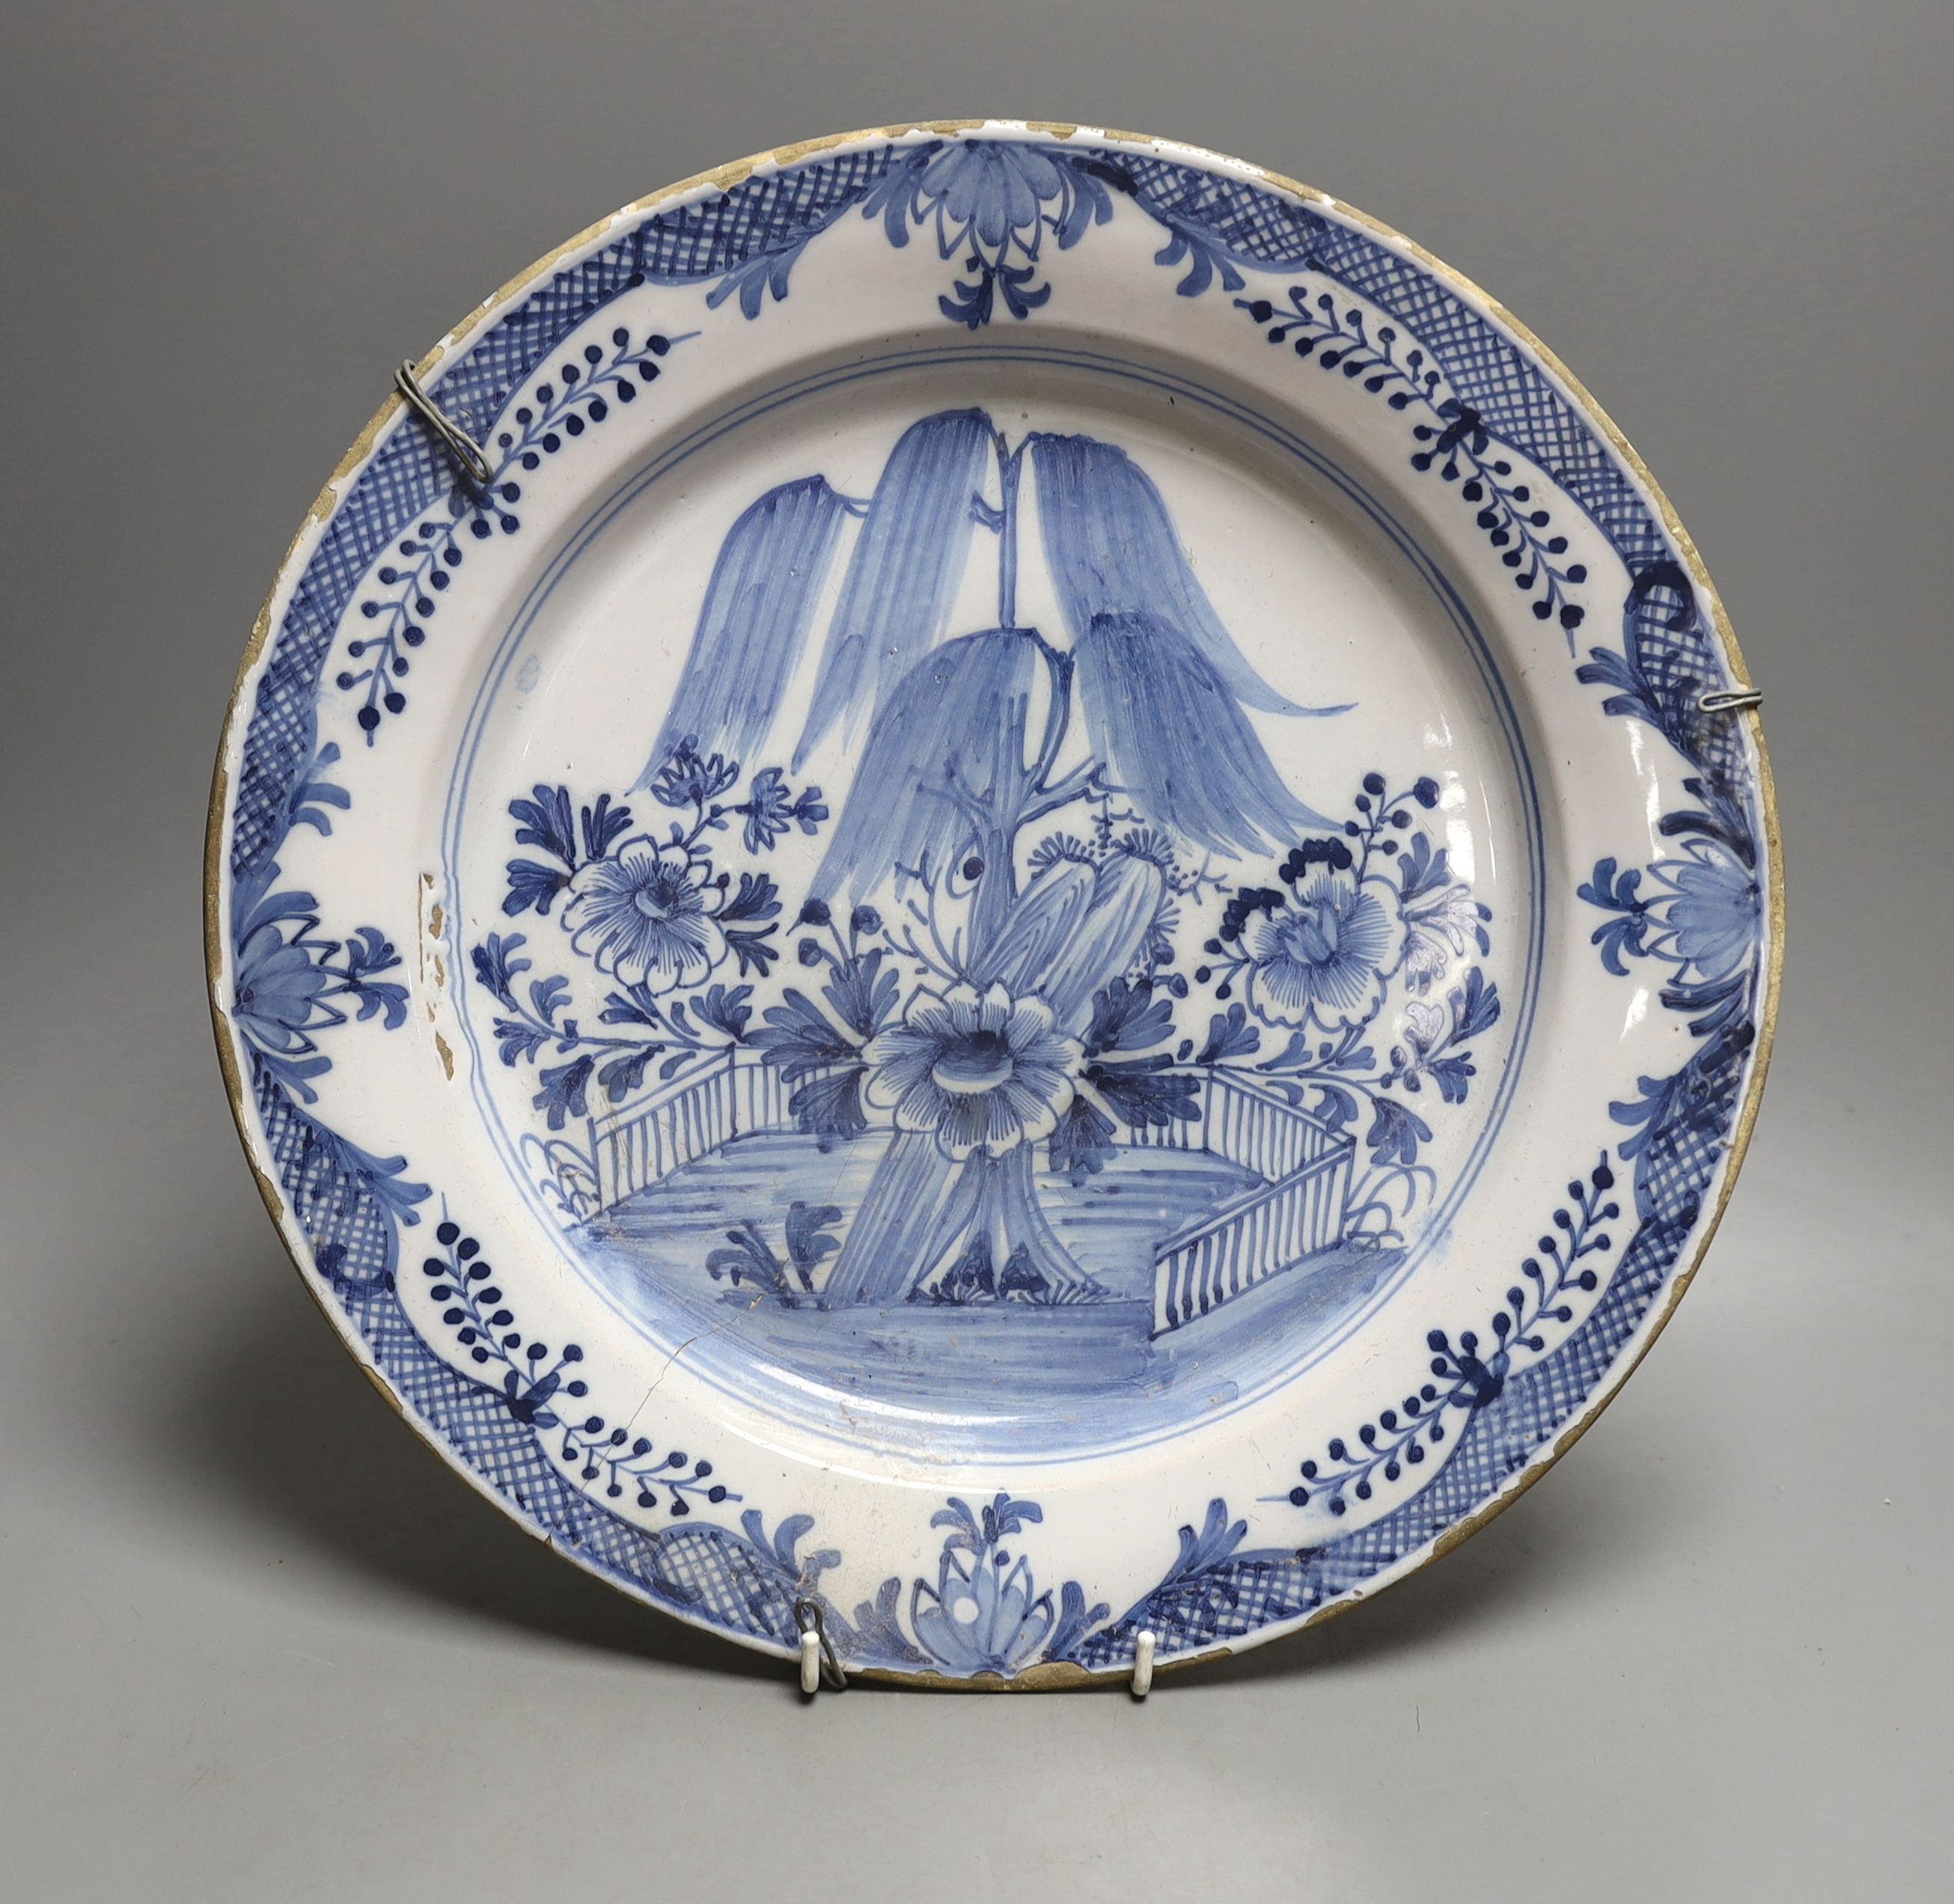 An 18th century Delft blue and white dish with central flower - 36cm diameter